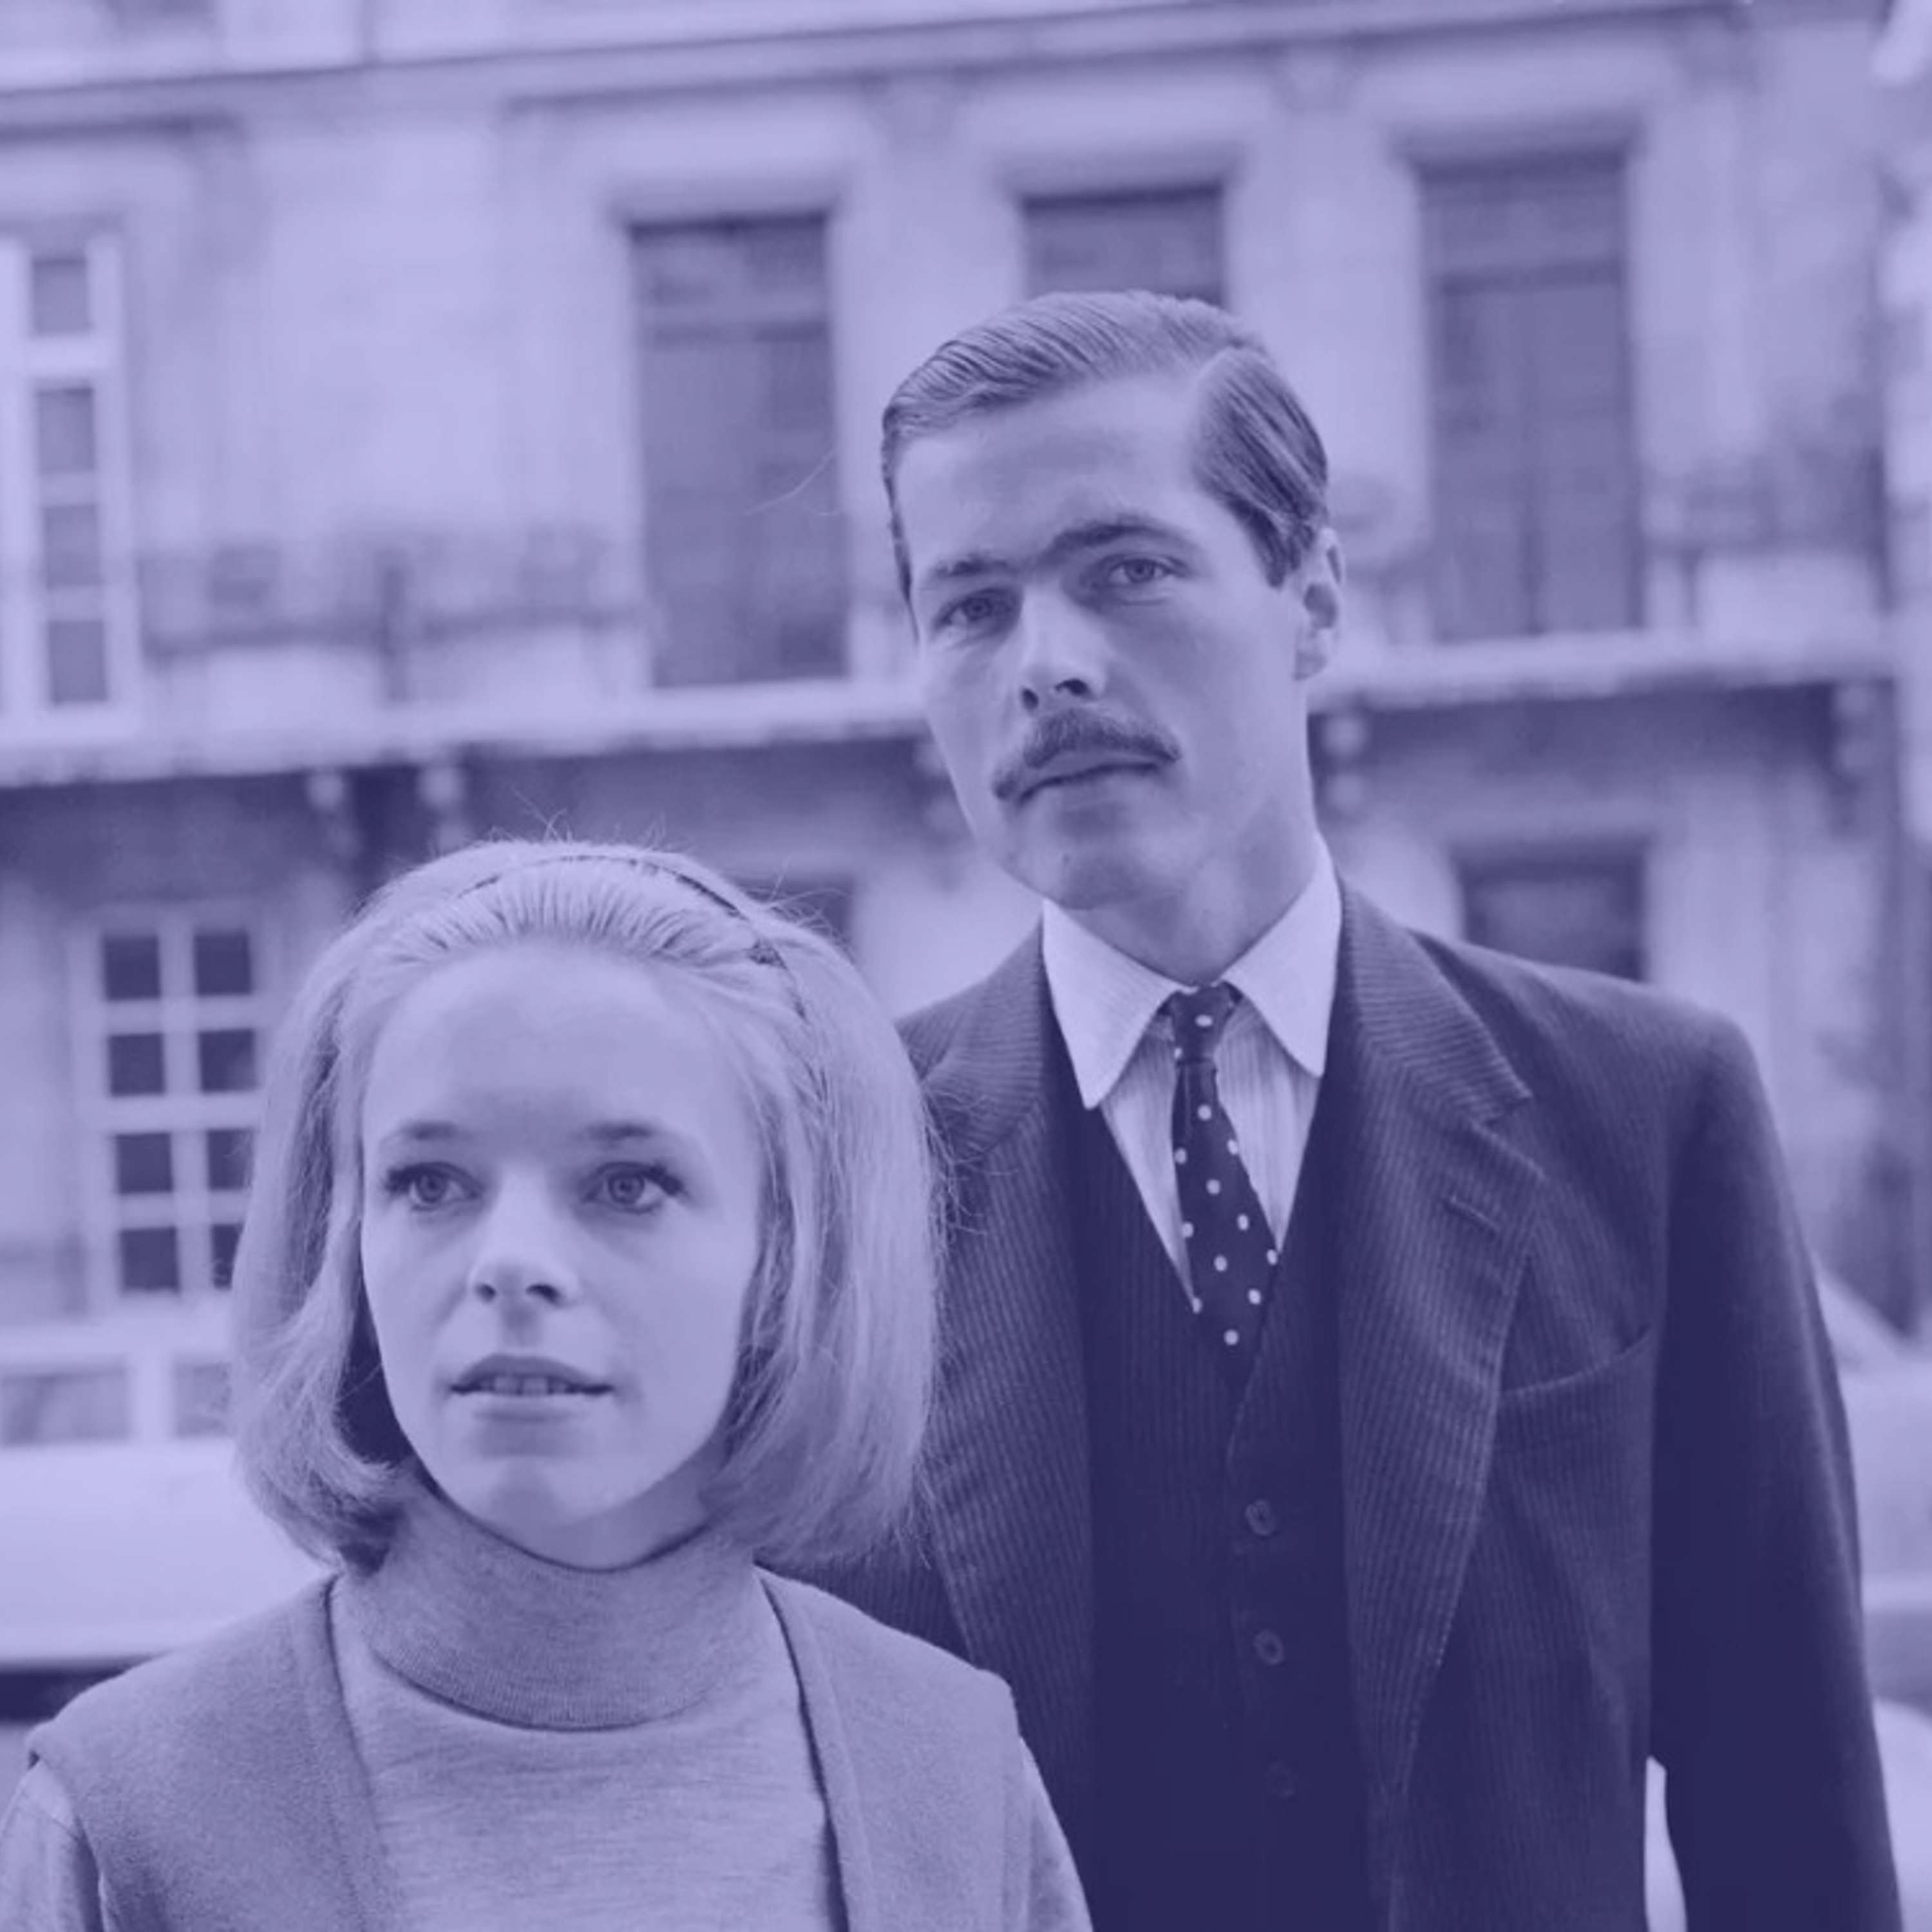 #354 | The Disappearance of Lord Lucan